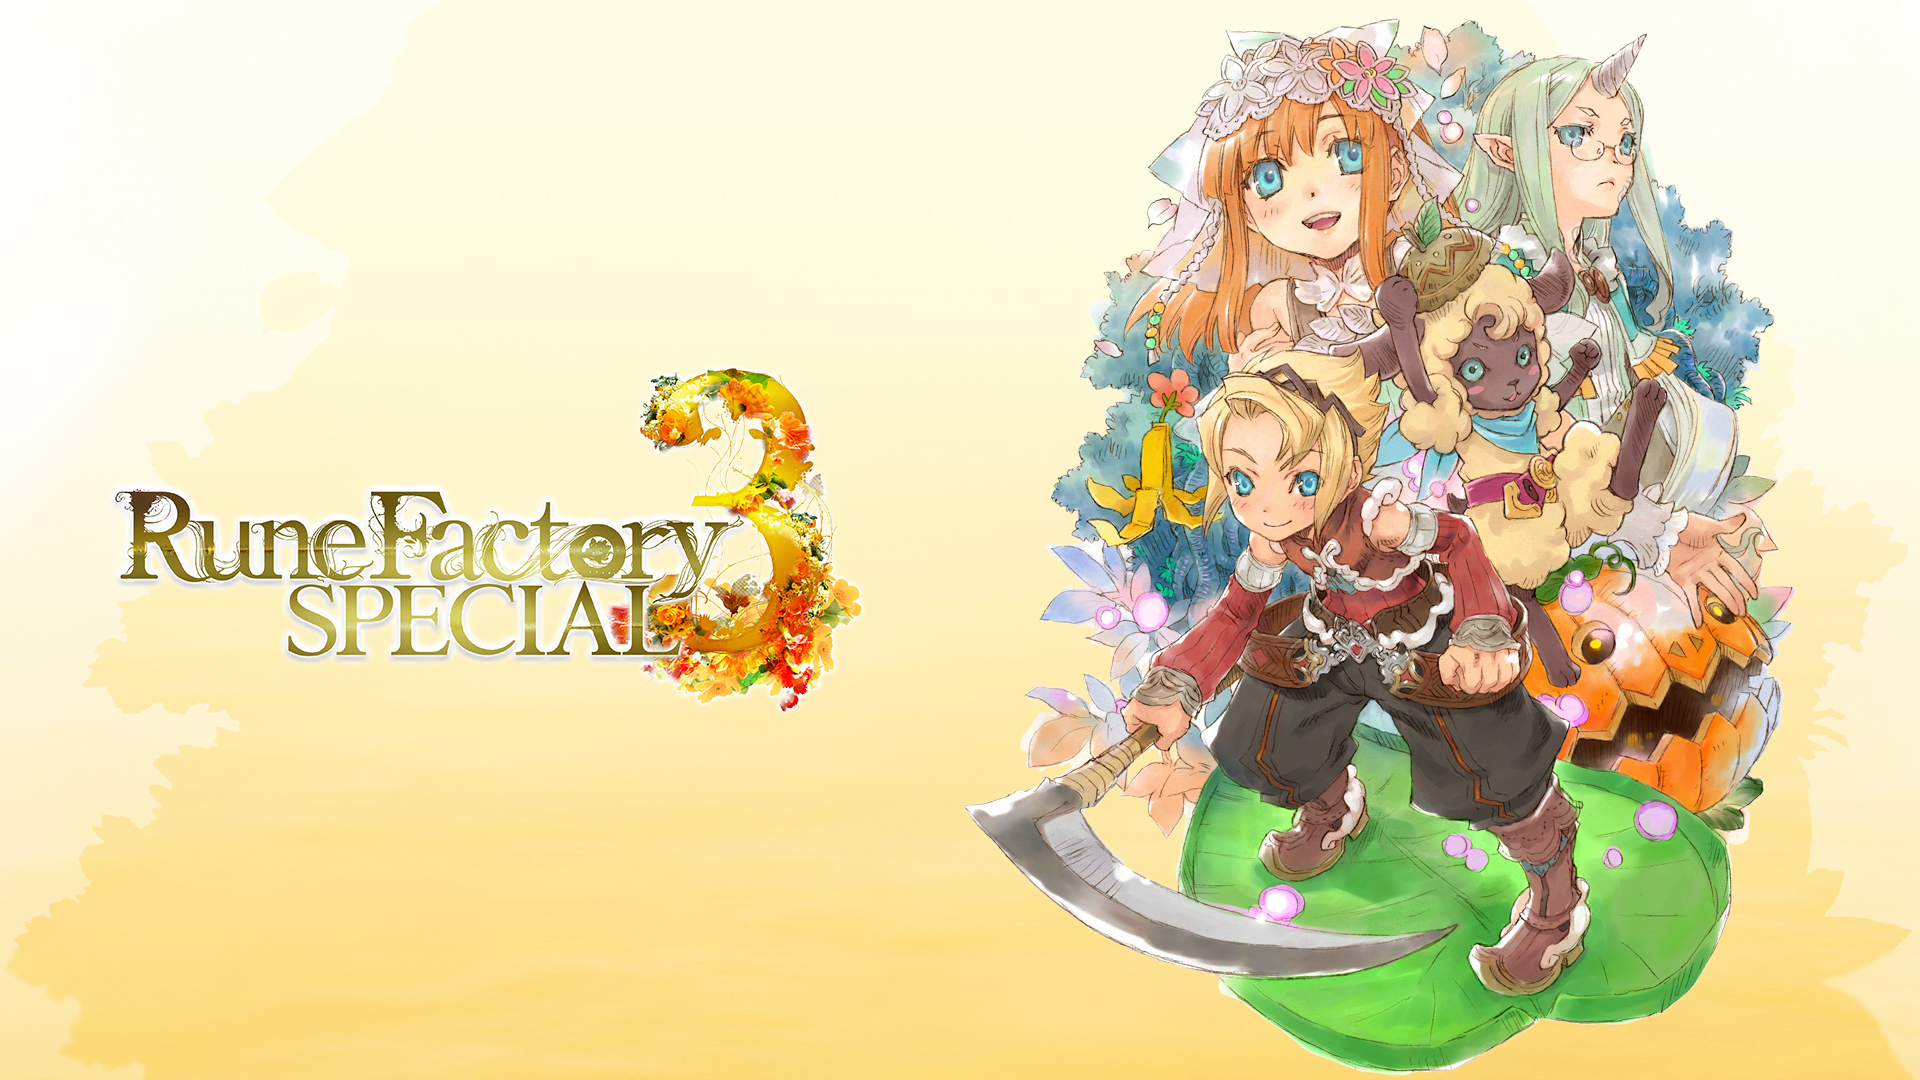 Rune Factory 3 Sex - Calling All Rangers! Rune Factory 5 is now available on Steam with a 10%  discount! | Marvelous Games